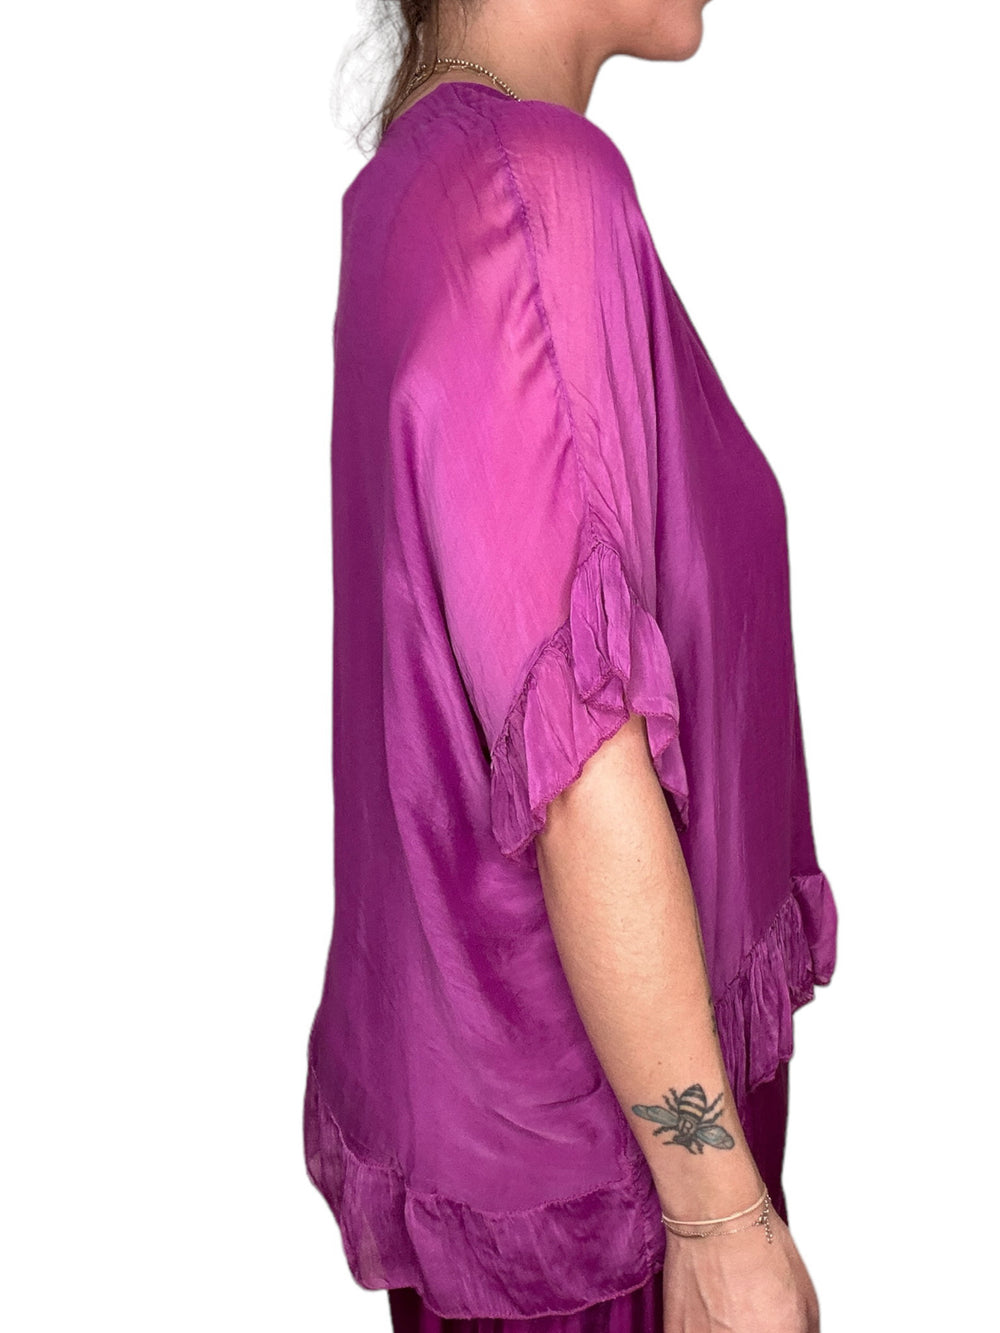 SILK RUFFLE EDGE TOP-ORCHID - Kingfisher Road - Online Boutique